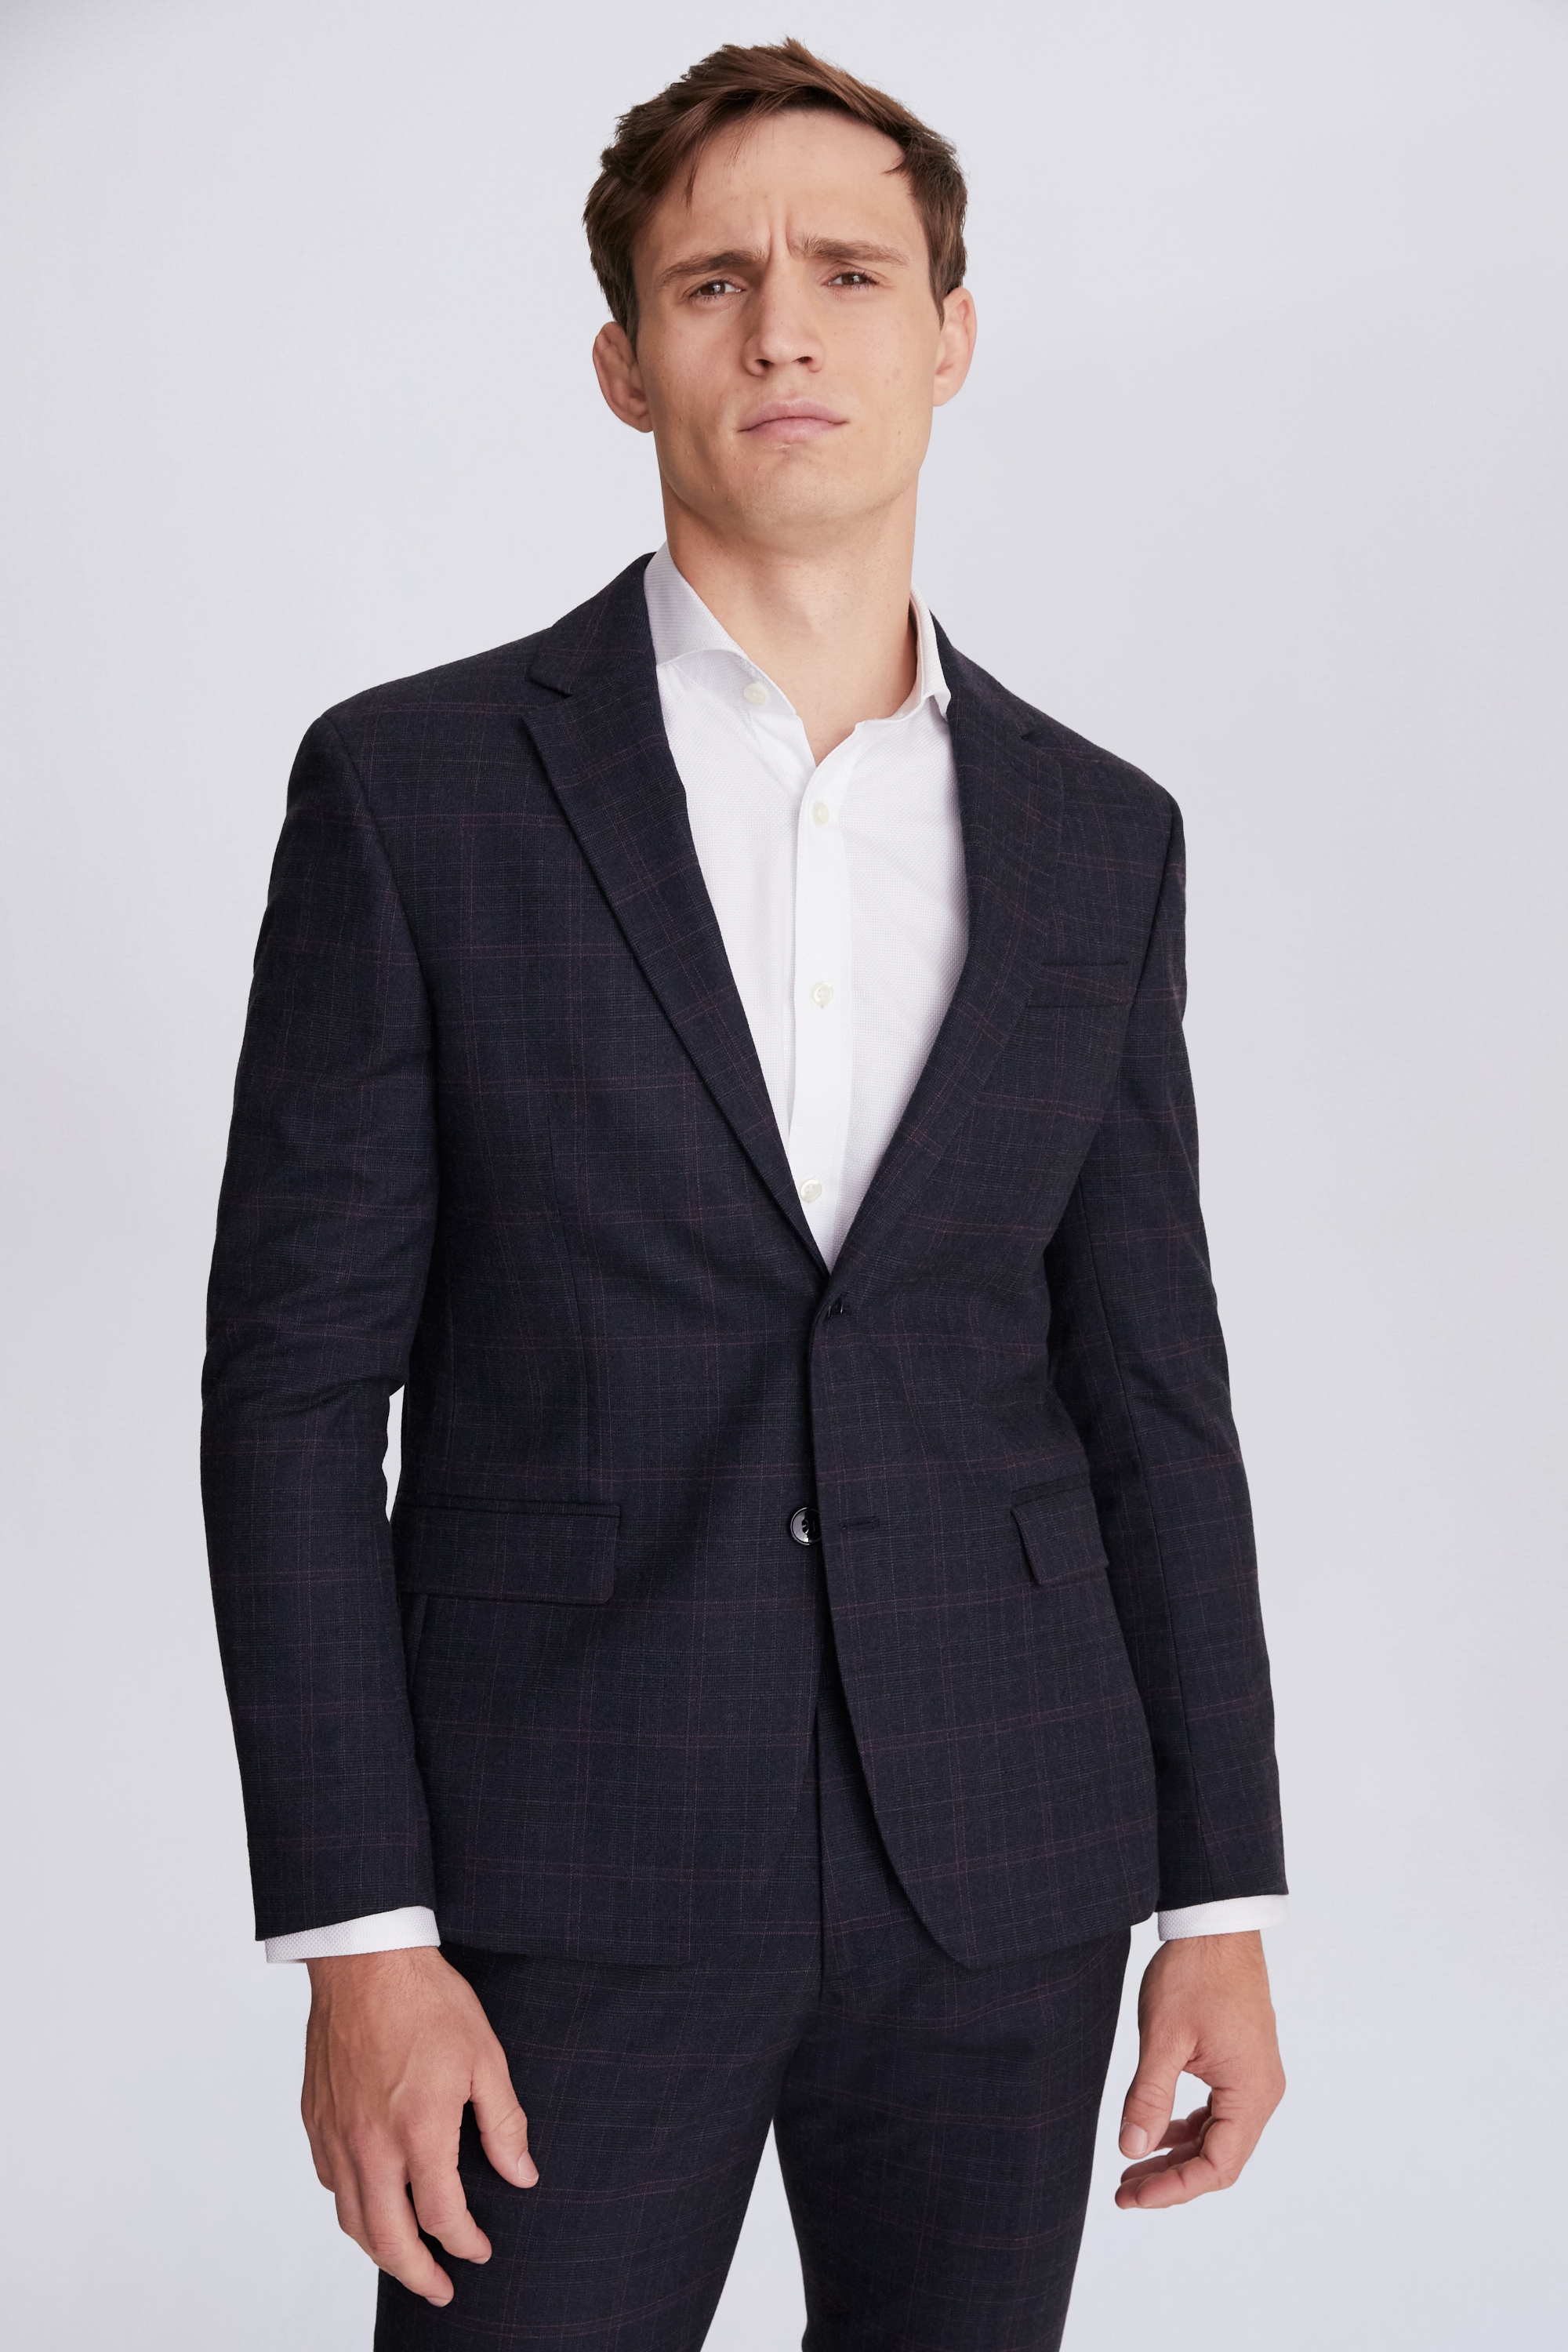 Slim Fit Navy Pink Check Jacket | Buy Online at Moss